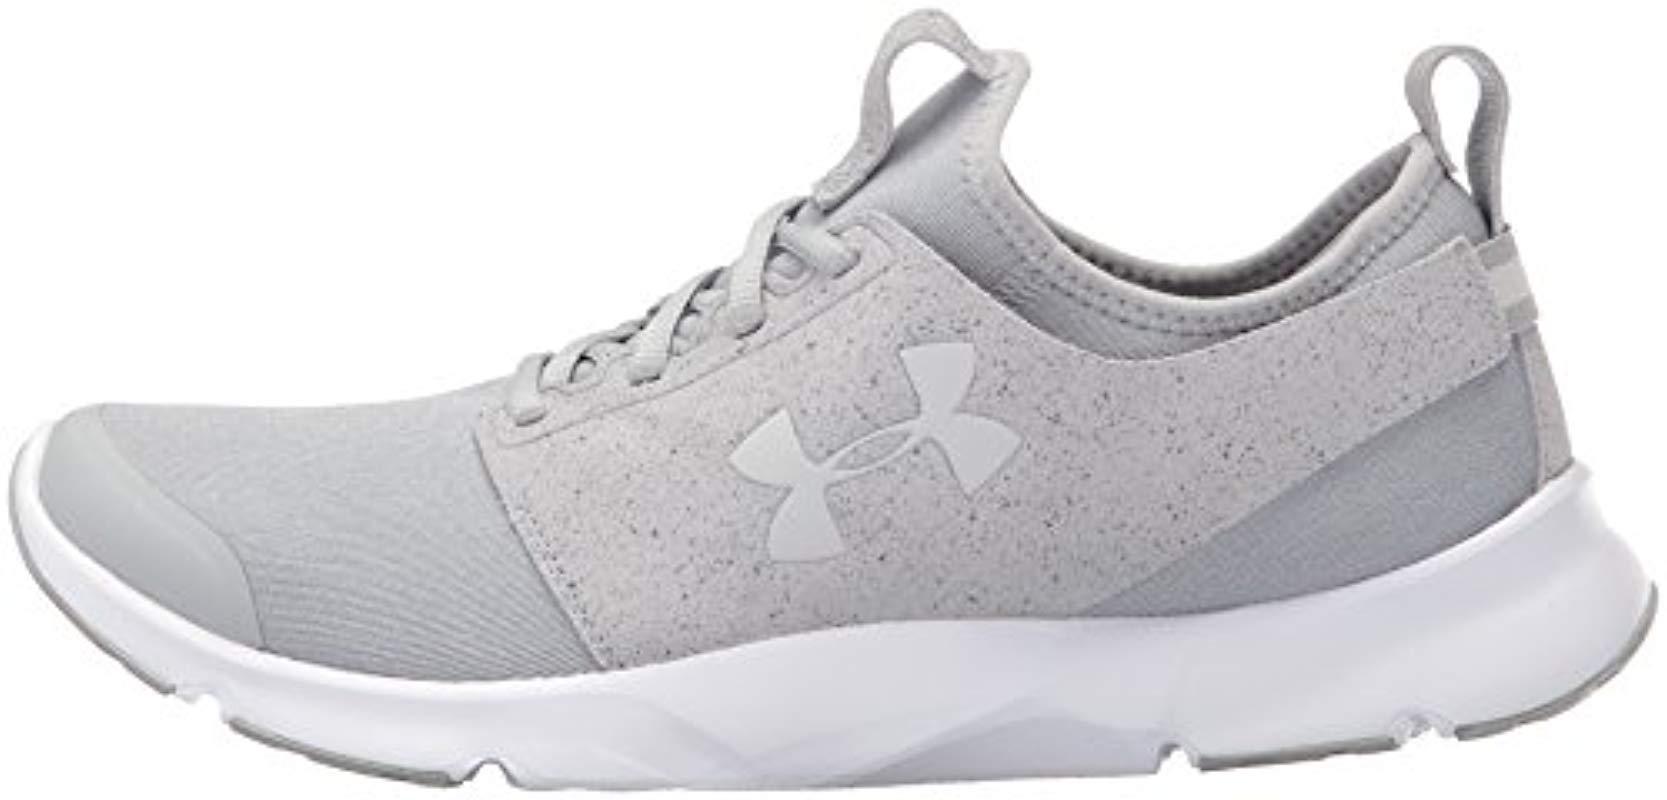 Under Armour Drift RN Mineral Mens Running Shoes Grey 